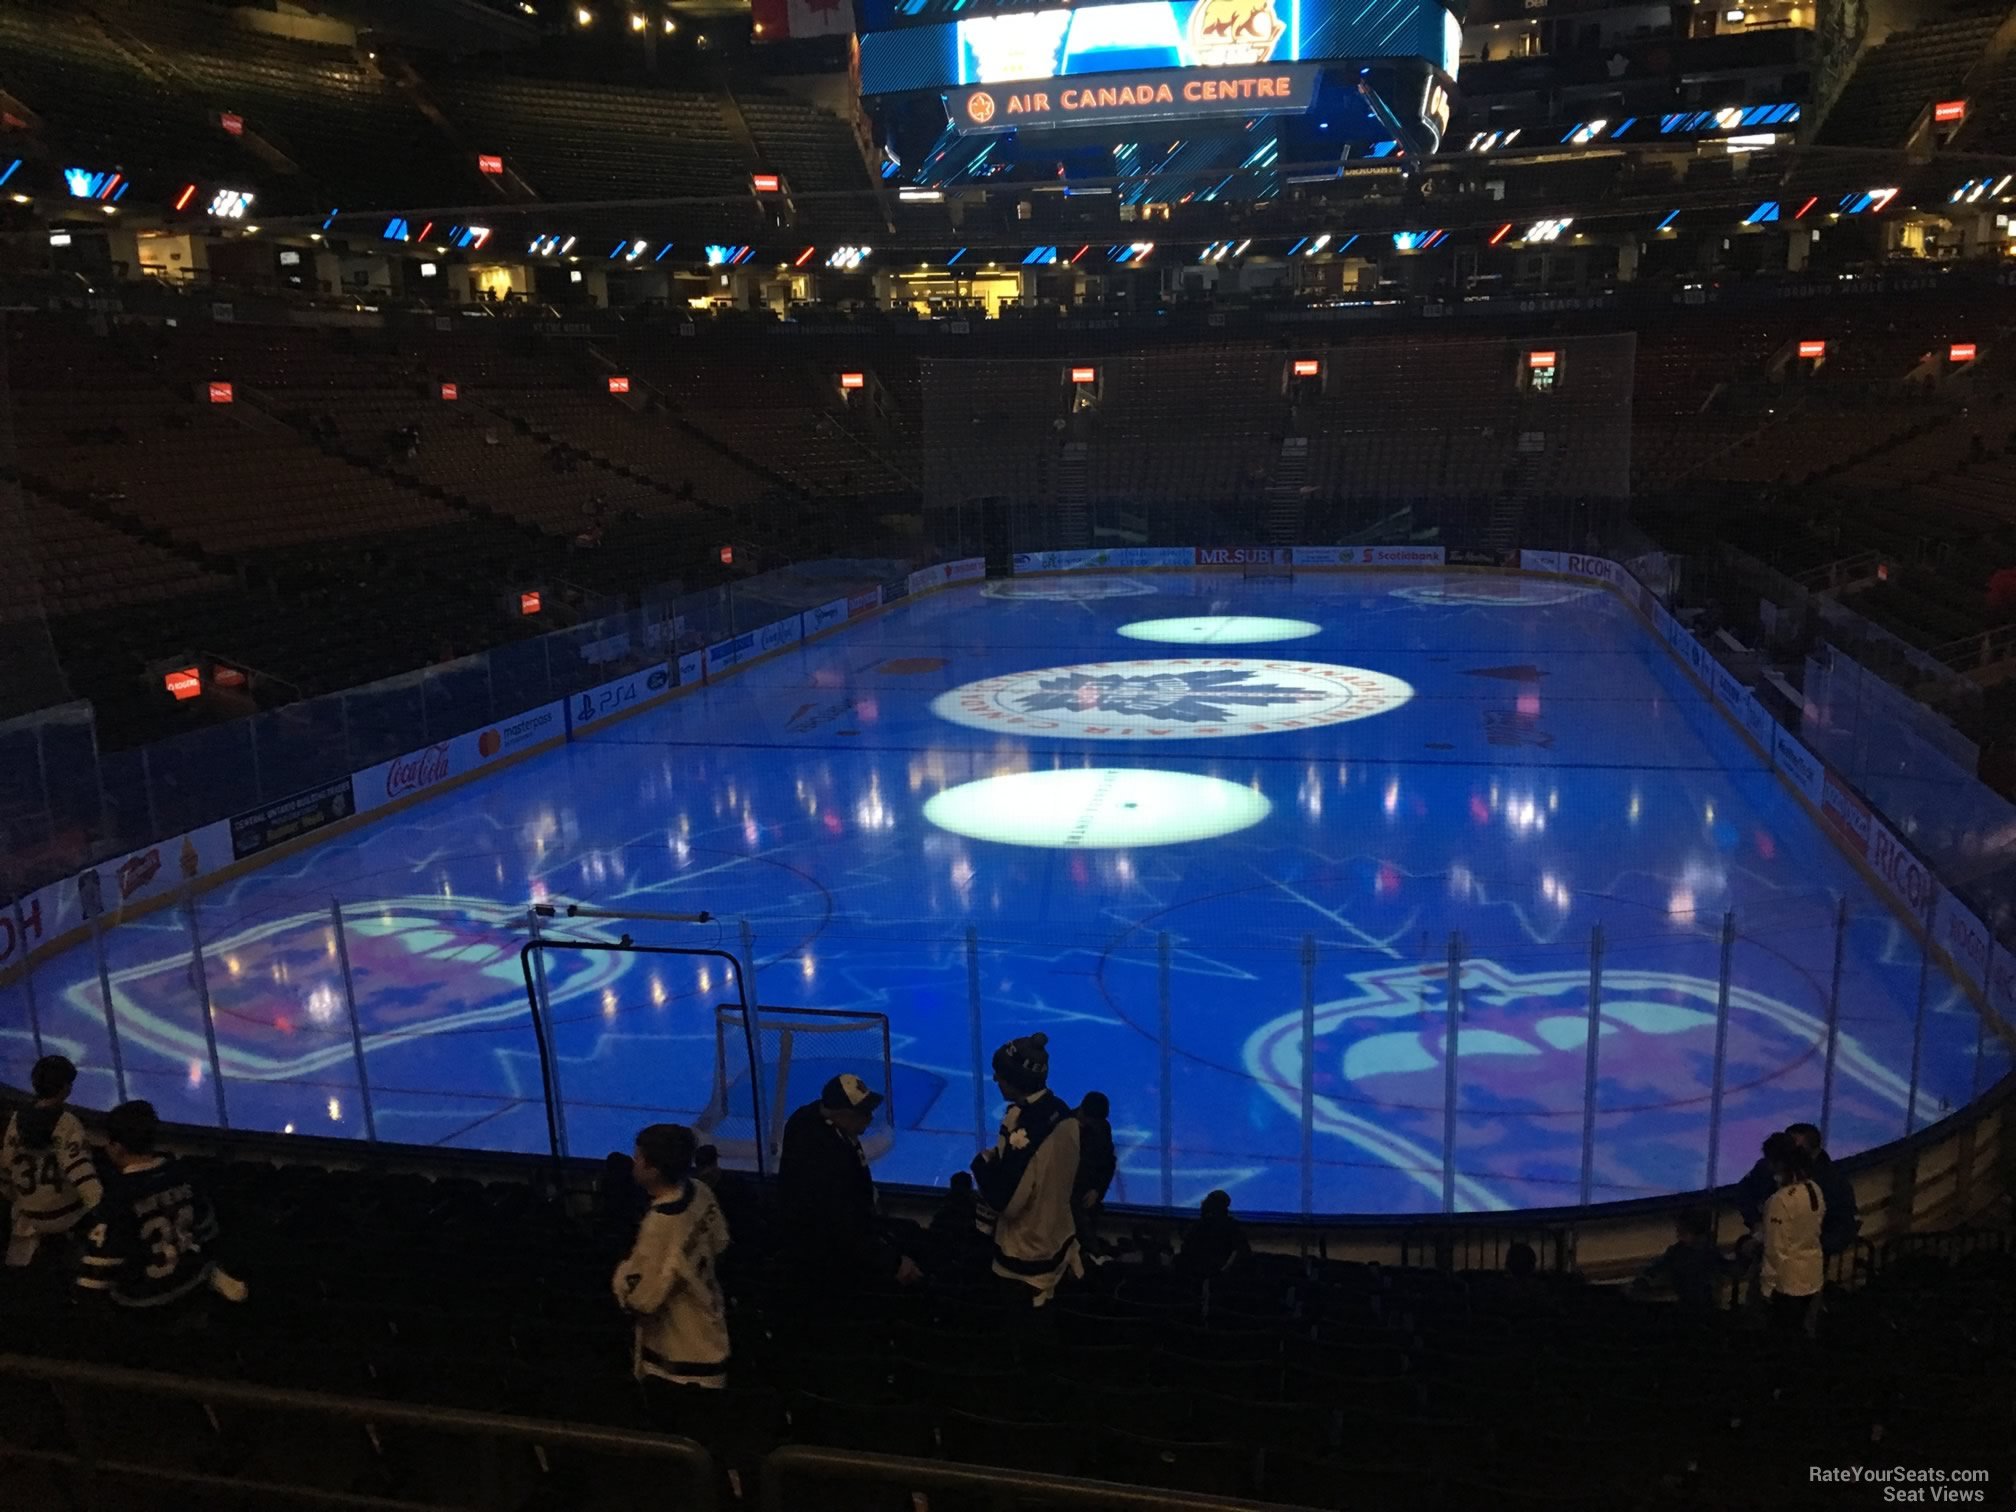 section 102, row 20 seat view  for hockey - scotiabank arena